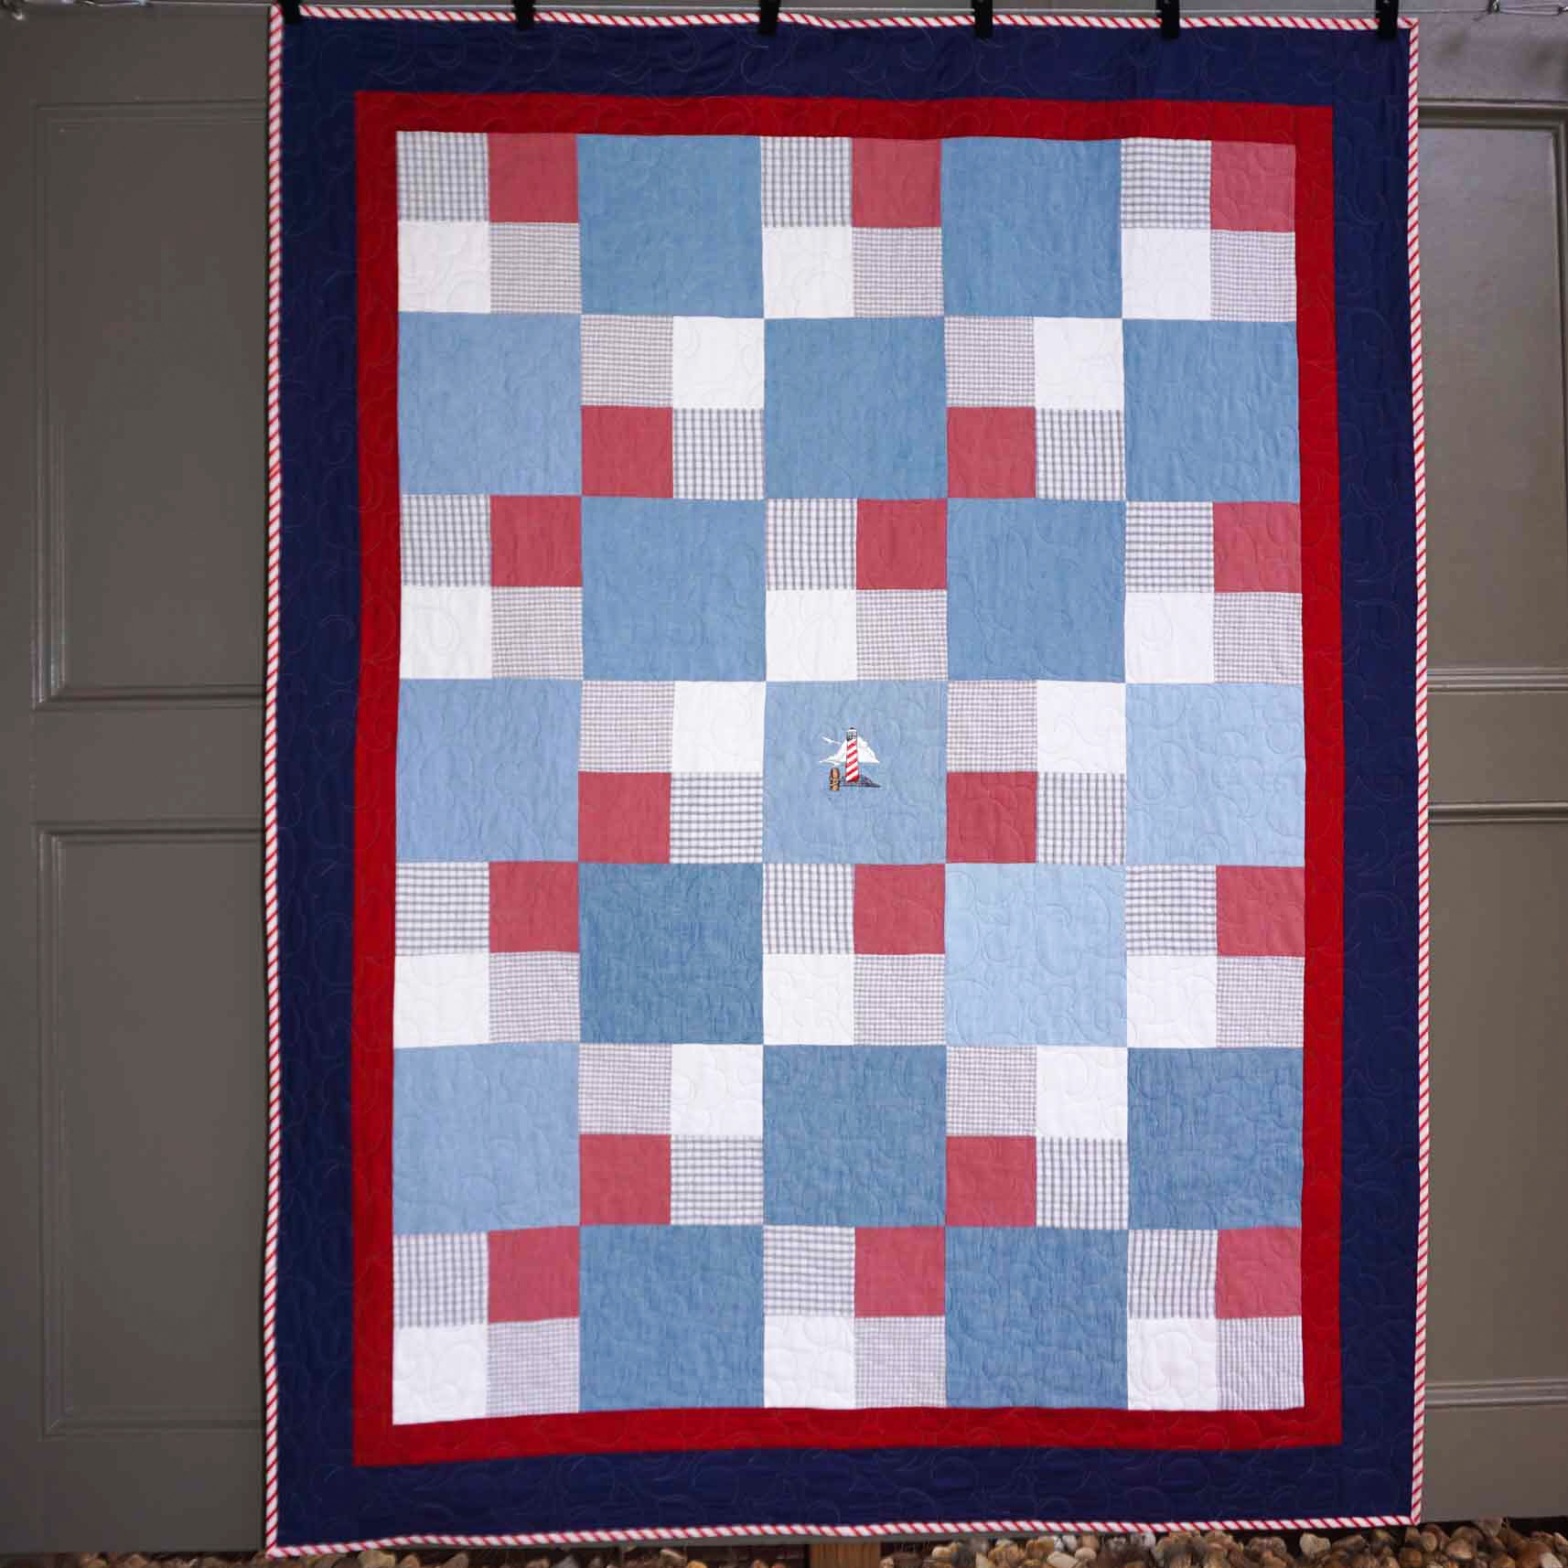 Memorial Memory Quilt using Checkmate pattern by Fat Quarter Shop